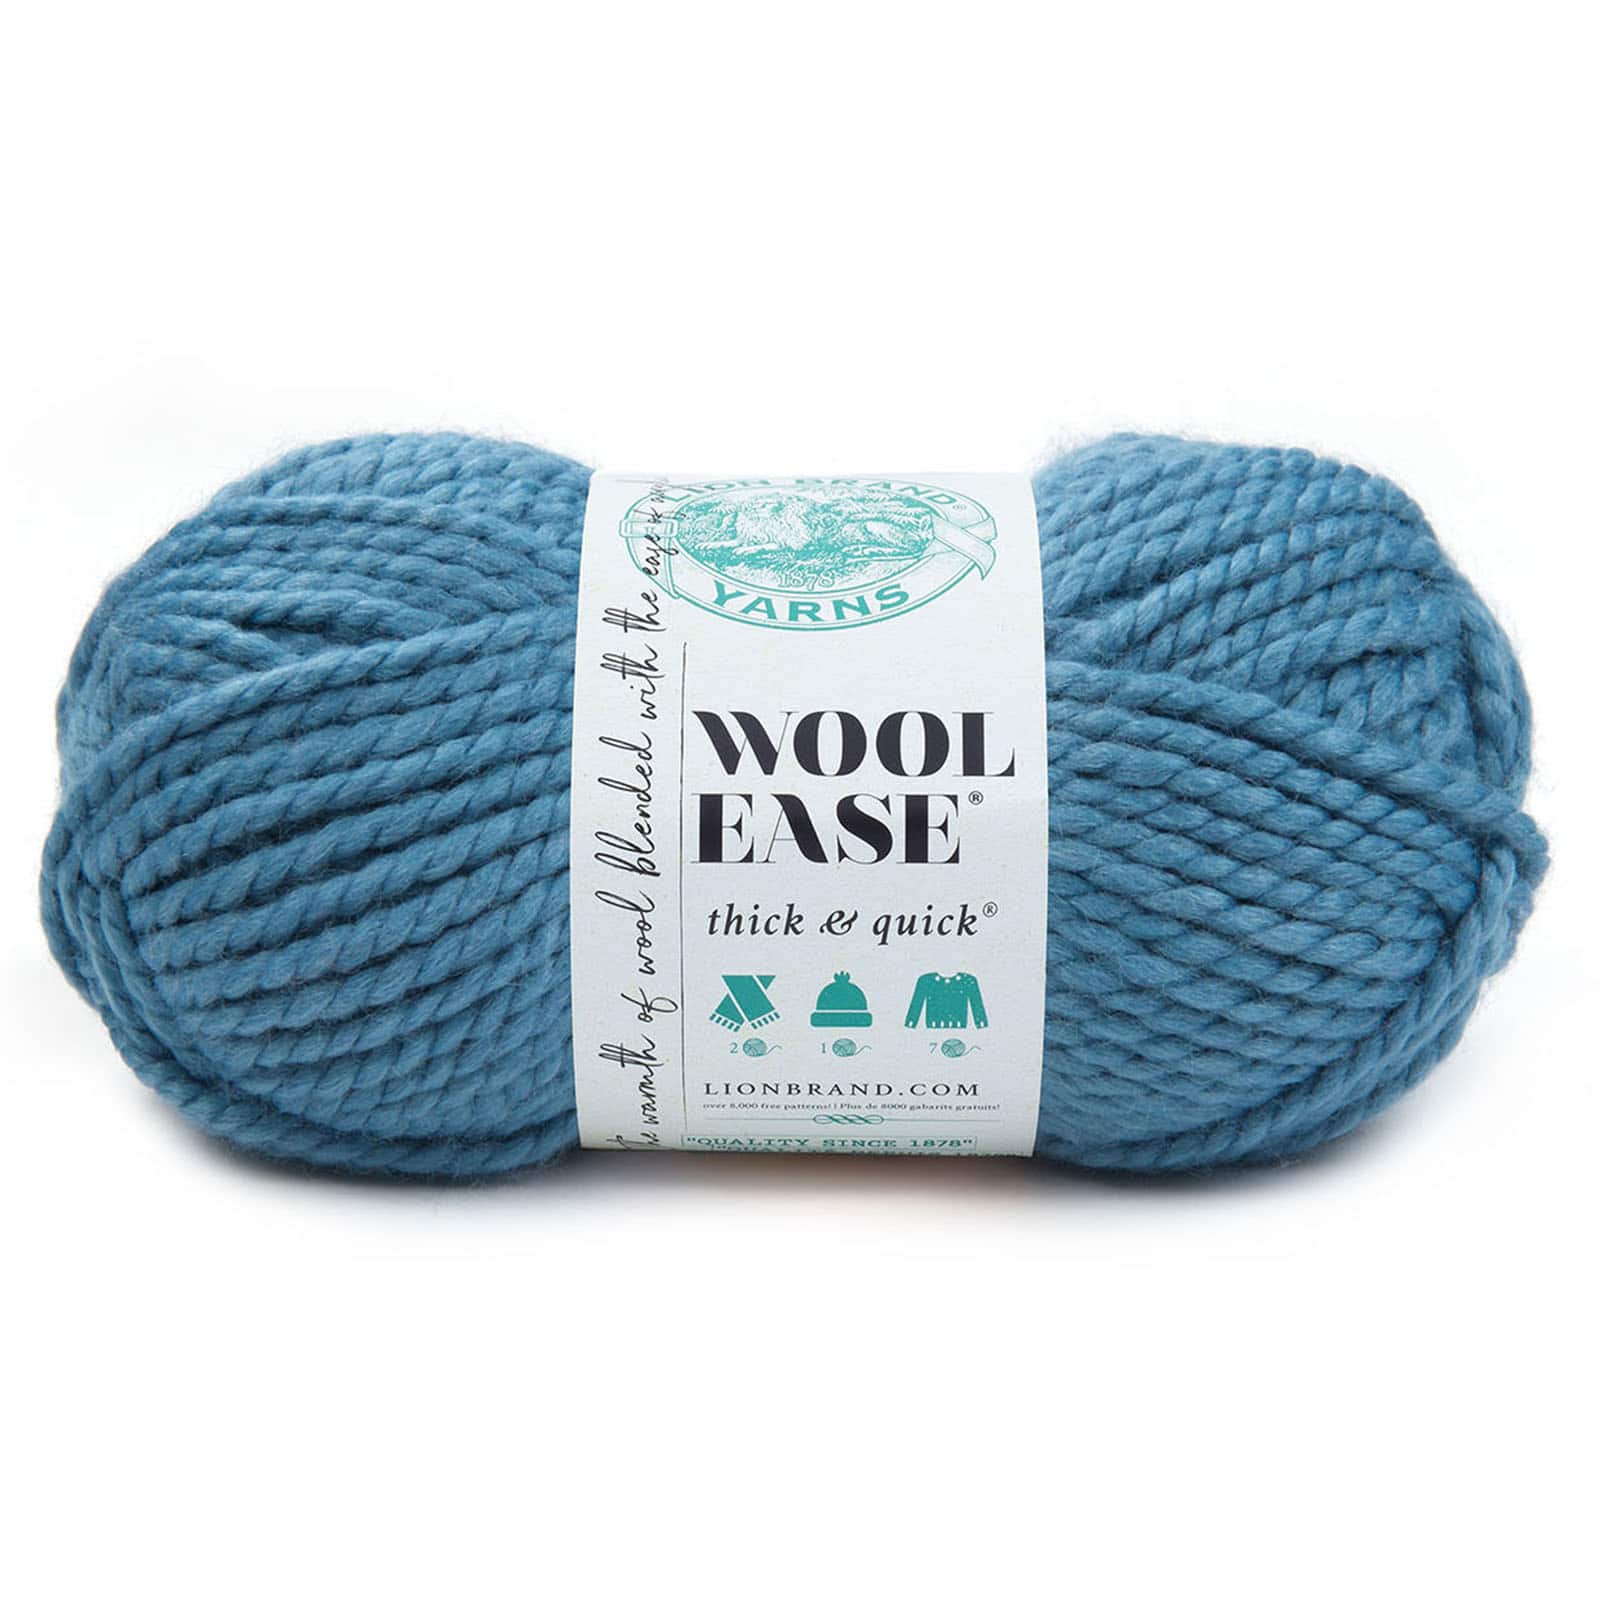 Lion Brand Wool-Ease Thick & Quick Yarn-Licorice, 1 count - Harris Teeter